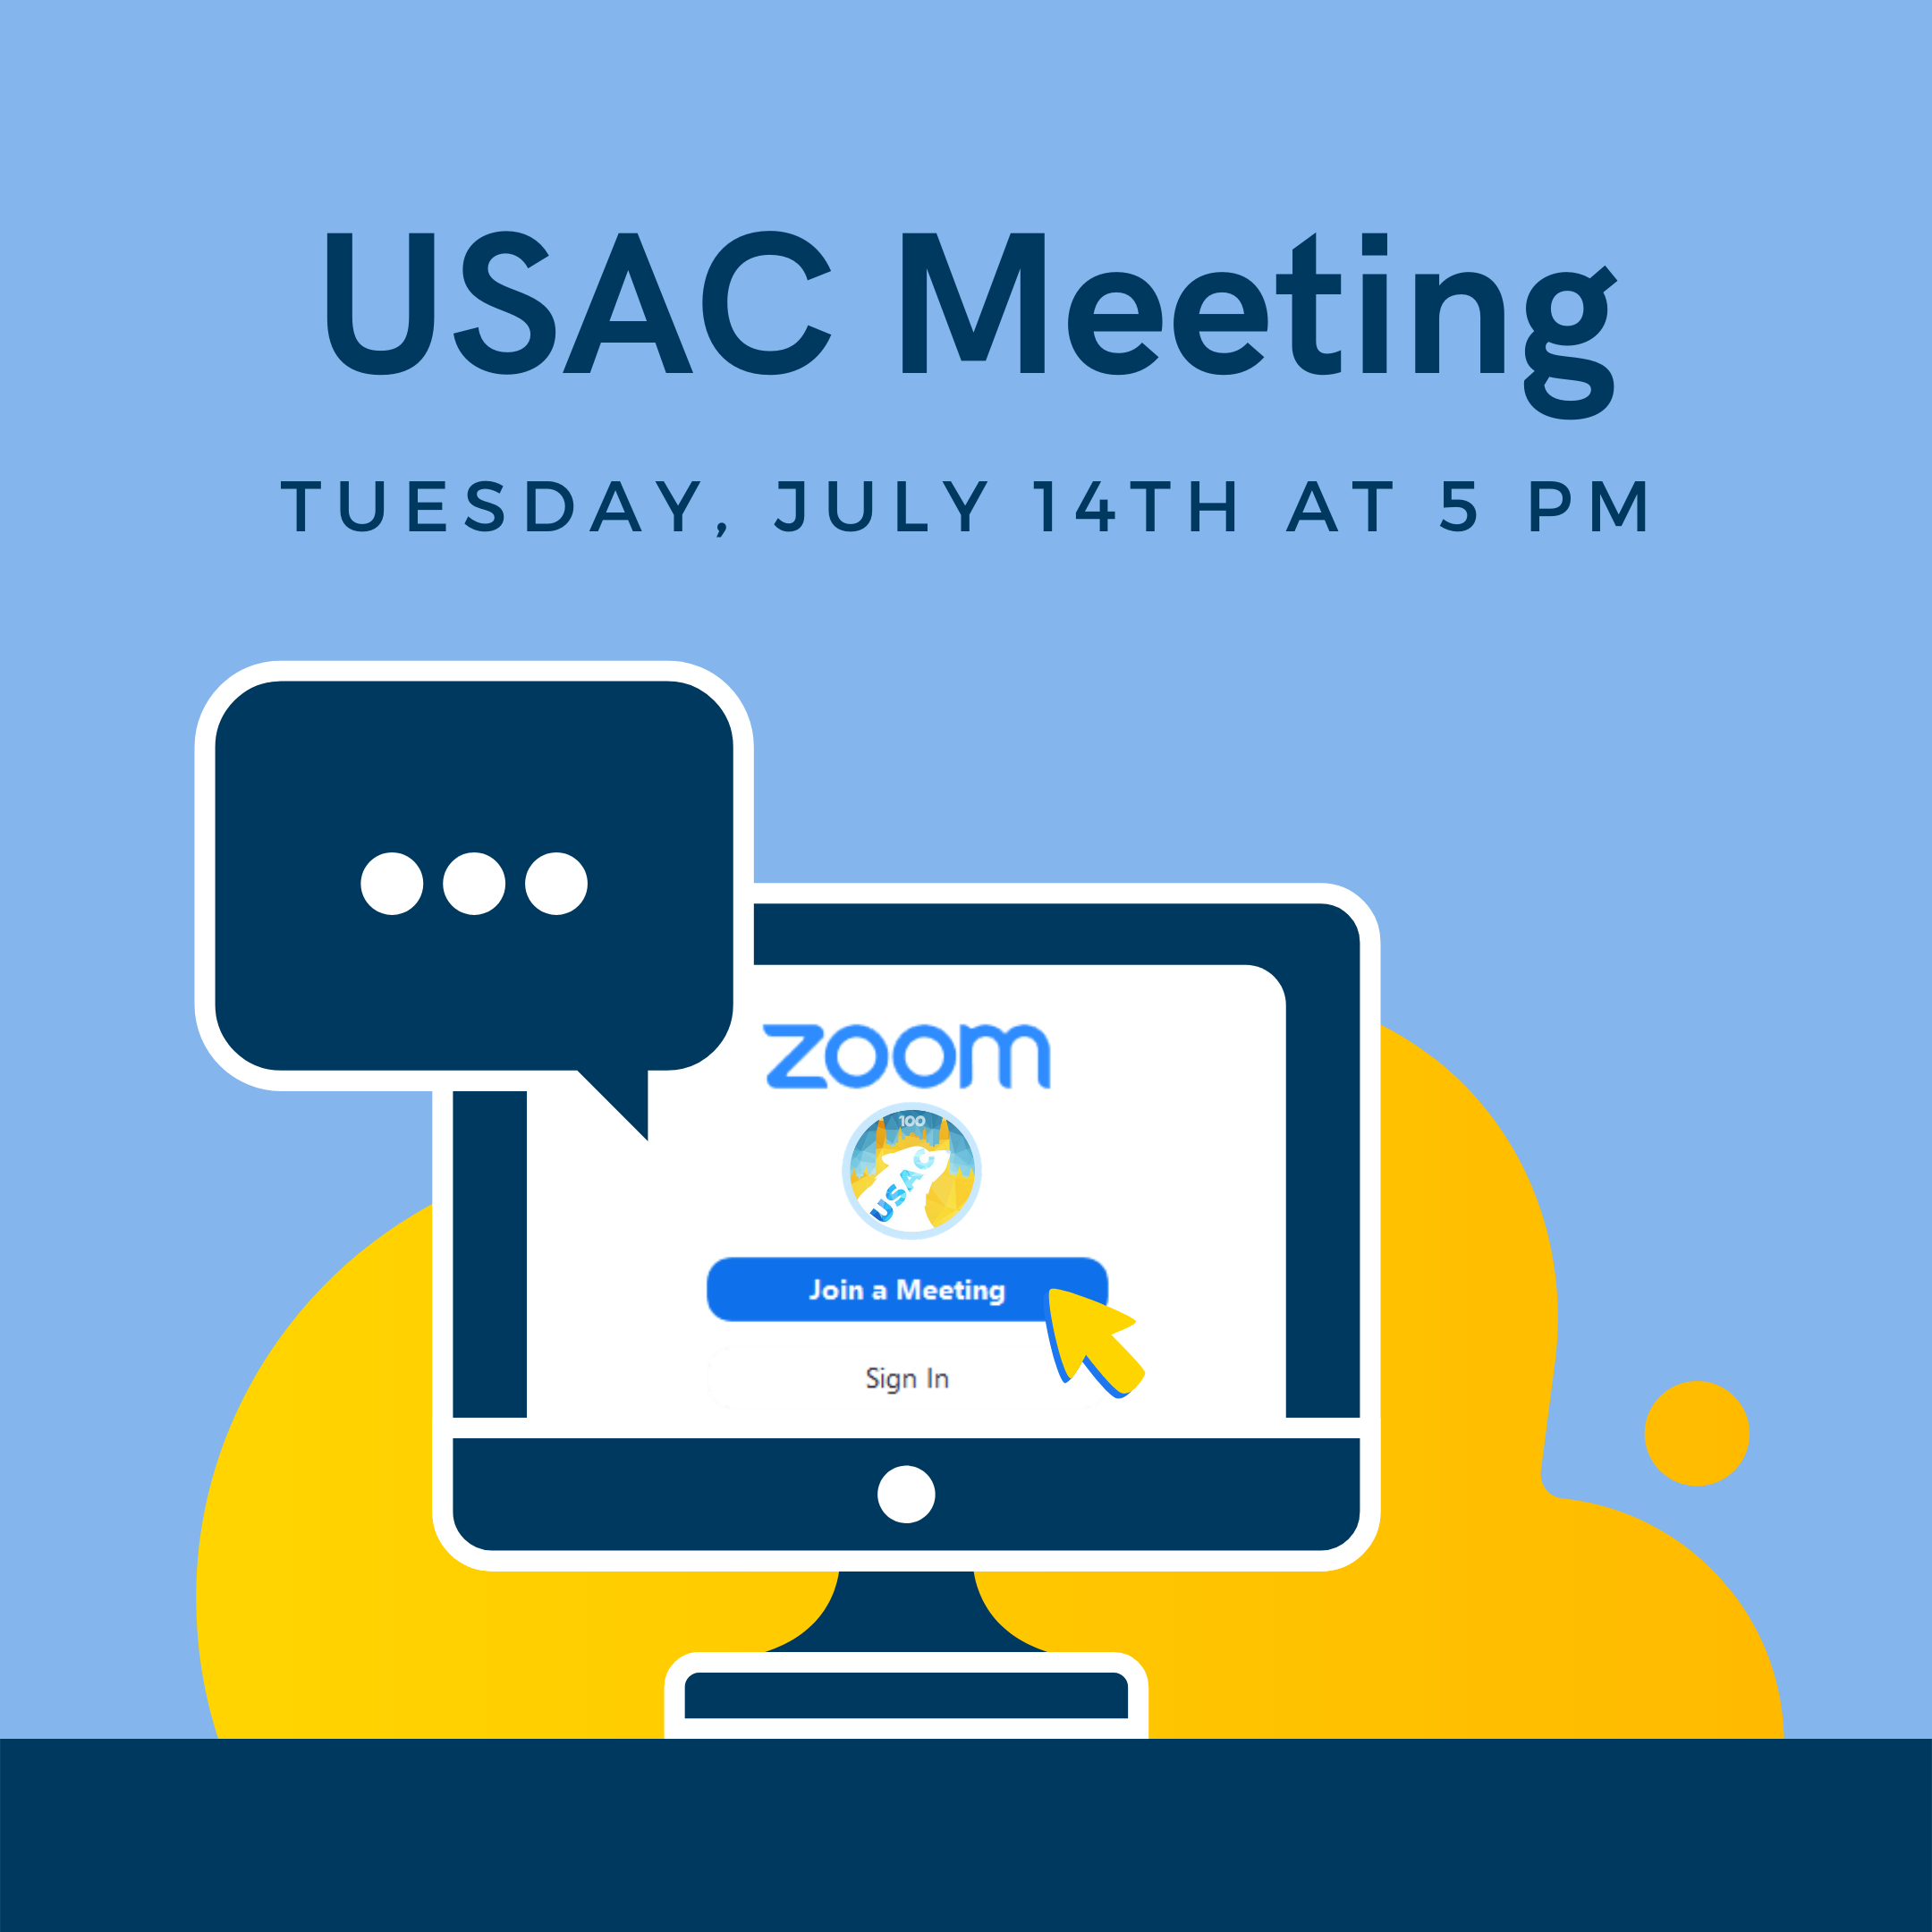 USAC Meeting on Tuesday, July 14th at 5:00 PM PST